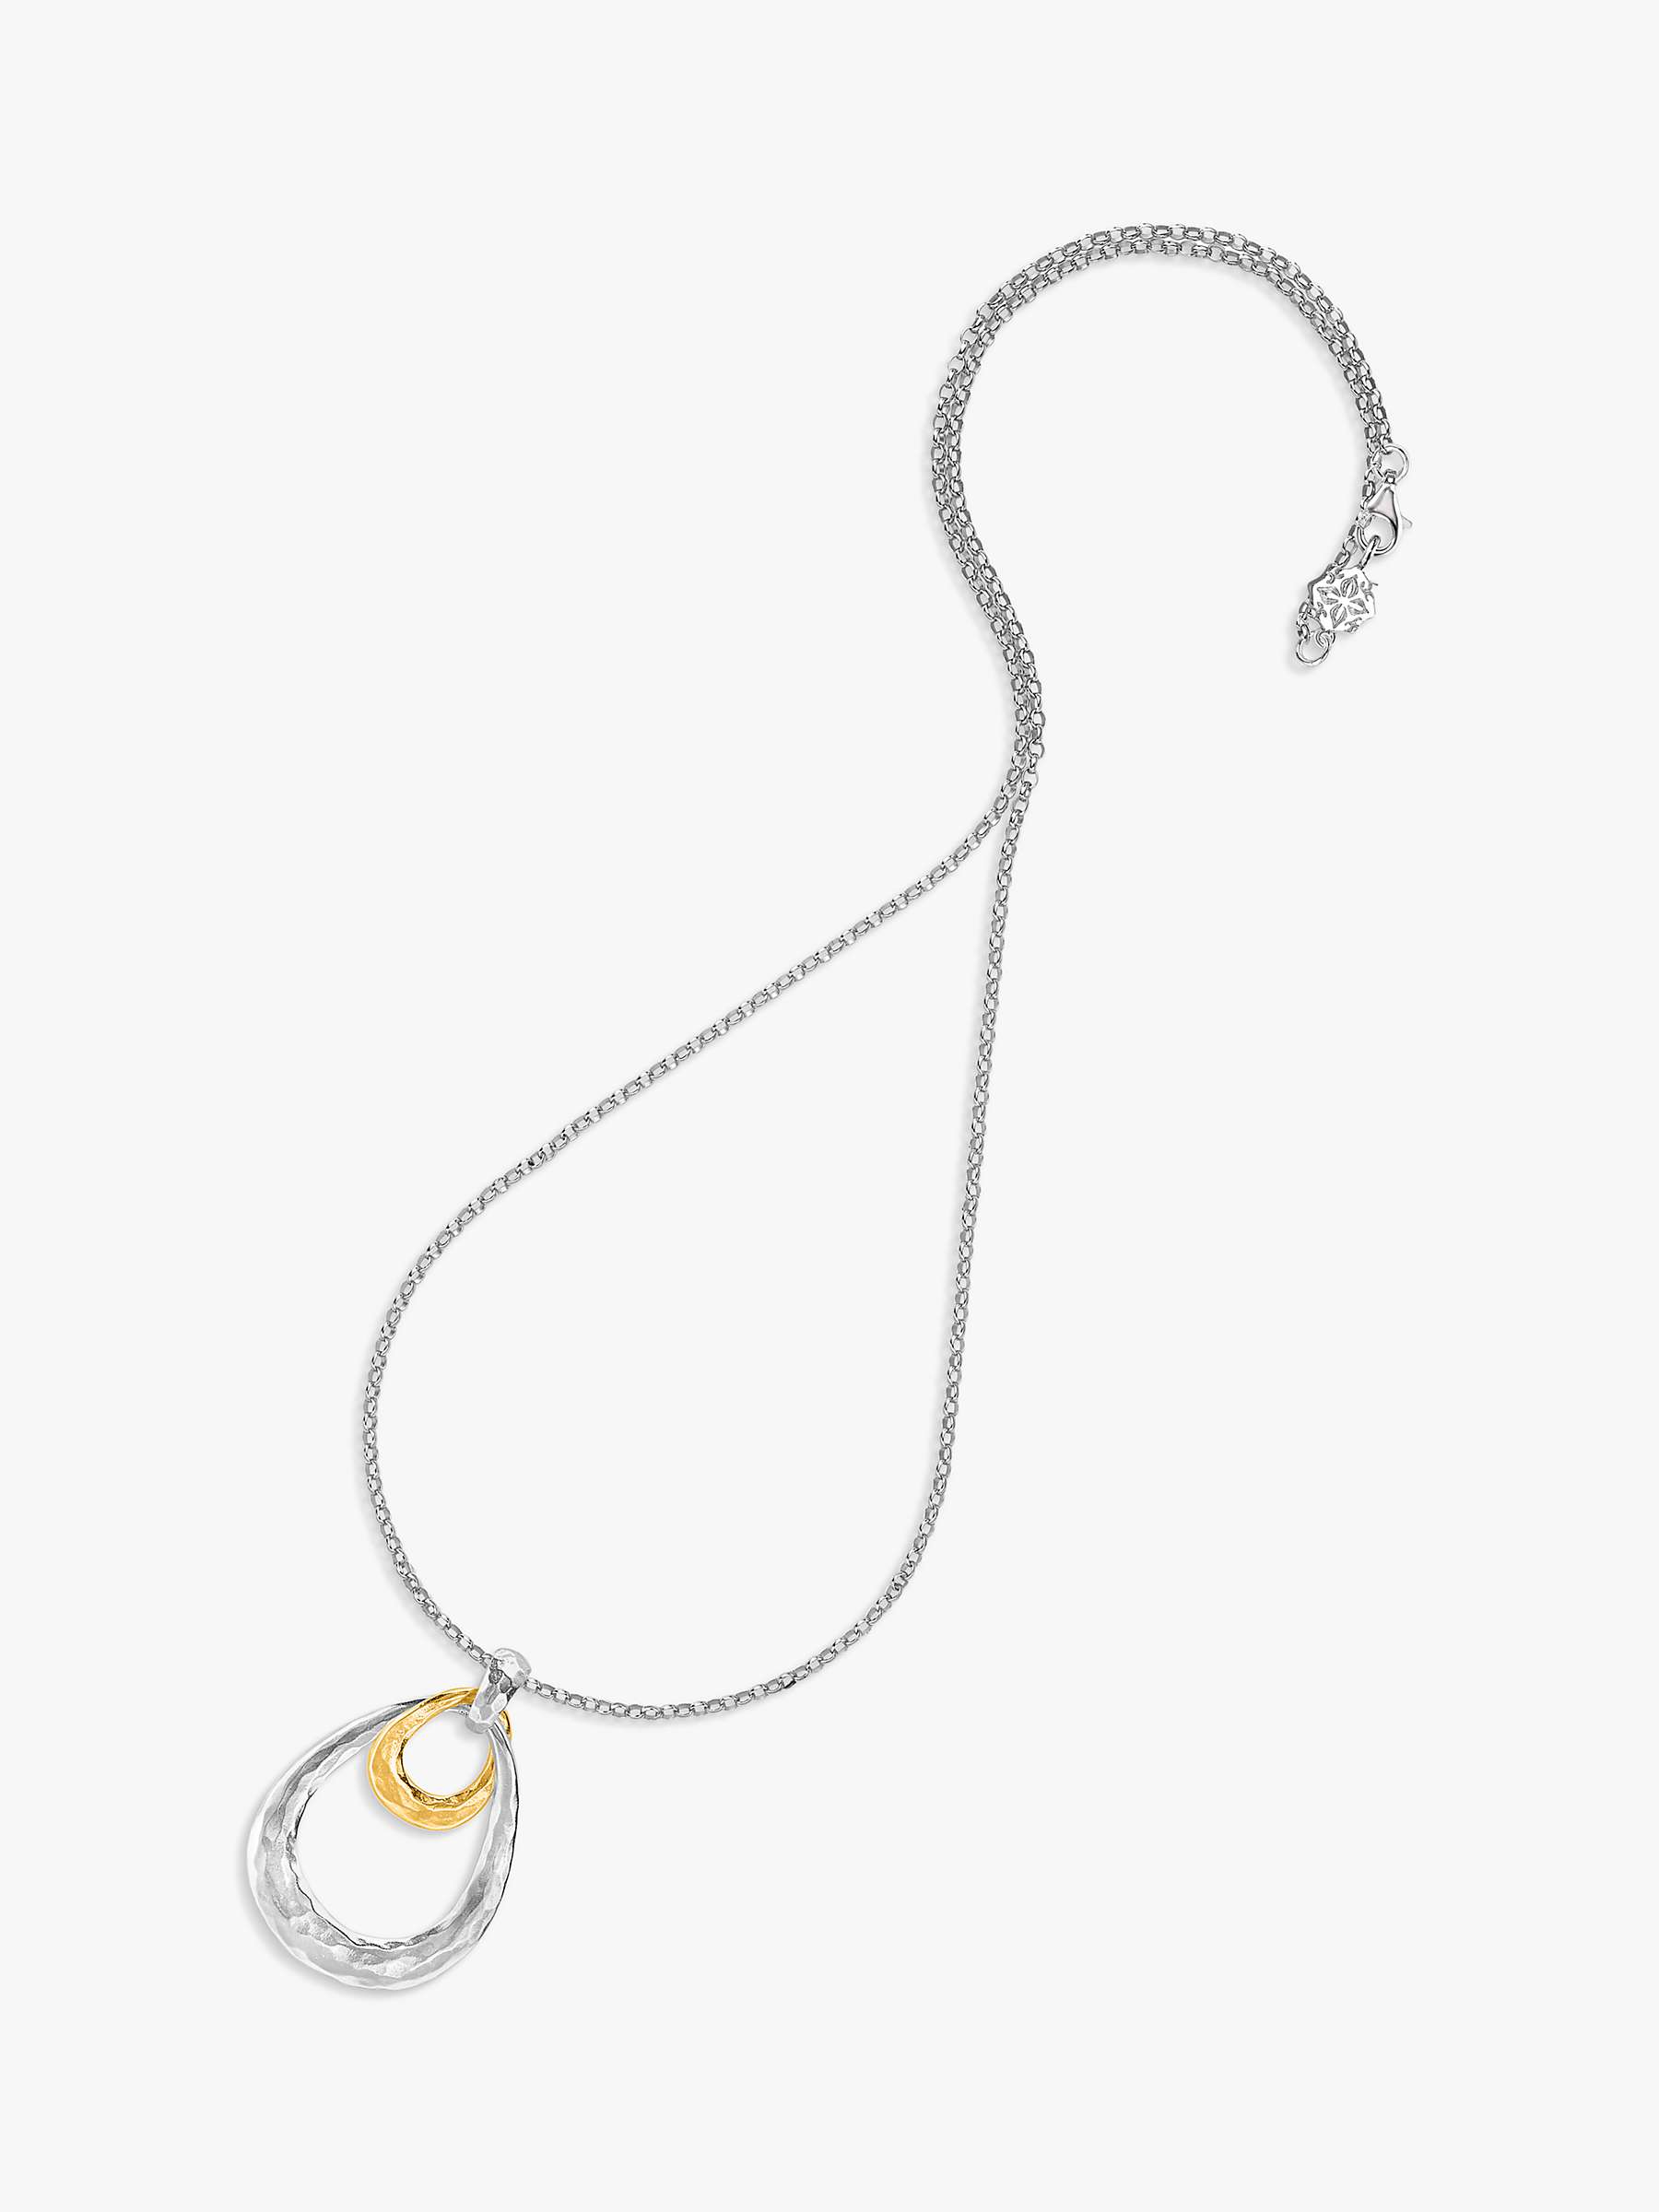 Buy Dower & Hall Entwined Double Pendant Necklace, Silver/Gold Online at johnlewis.com